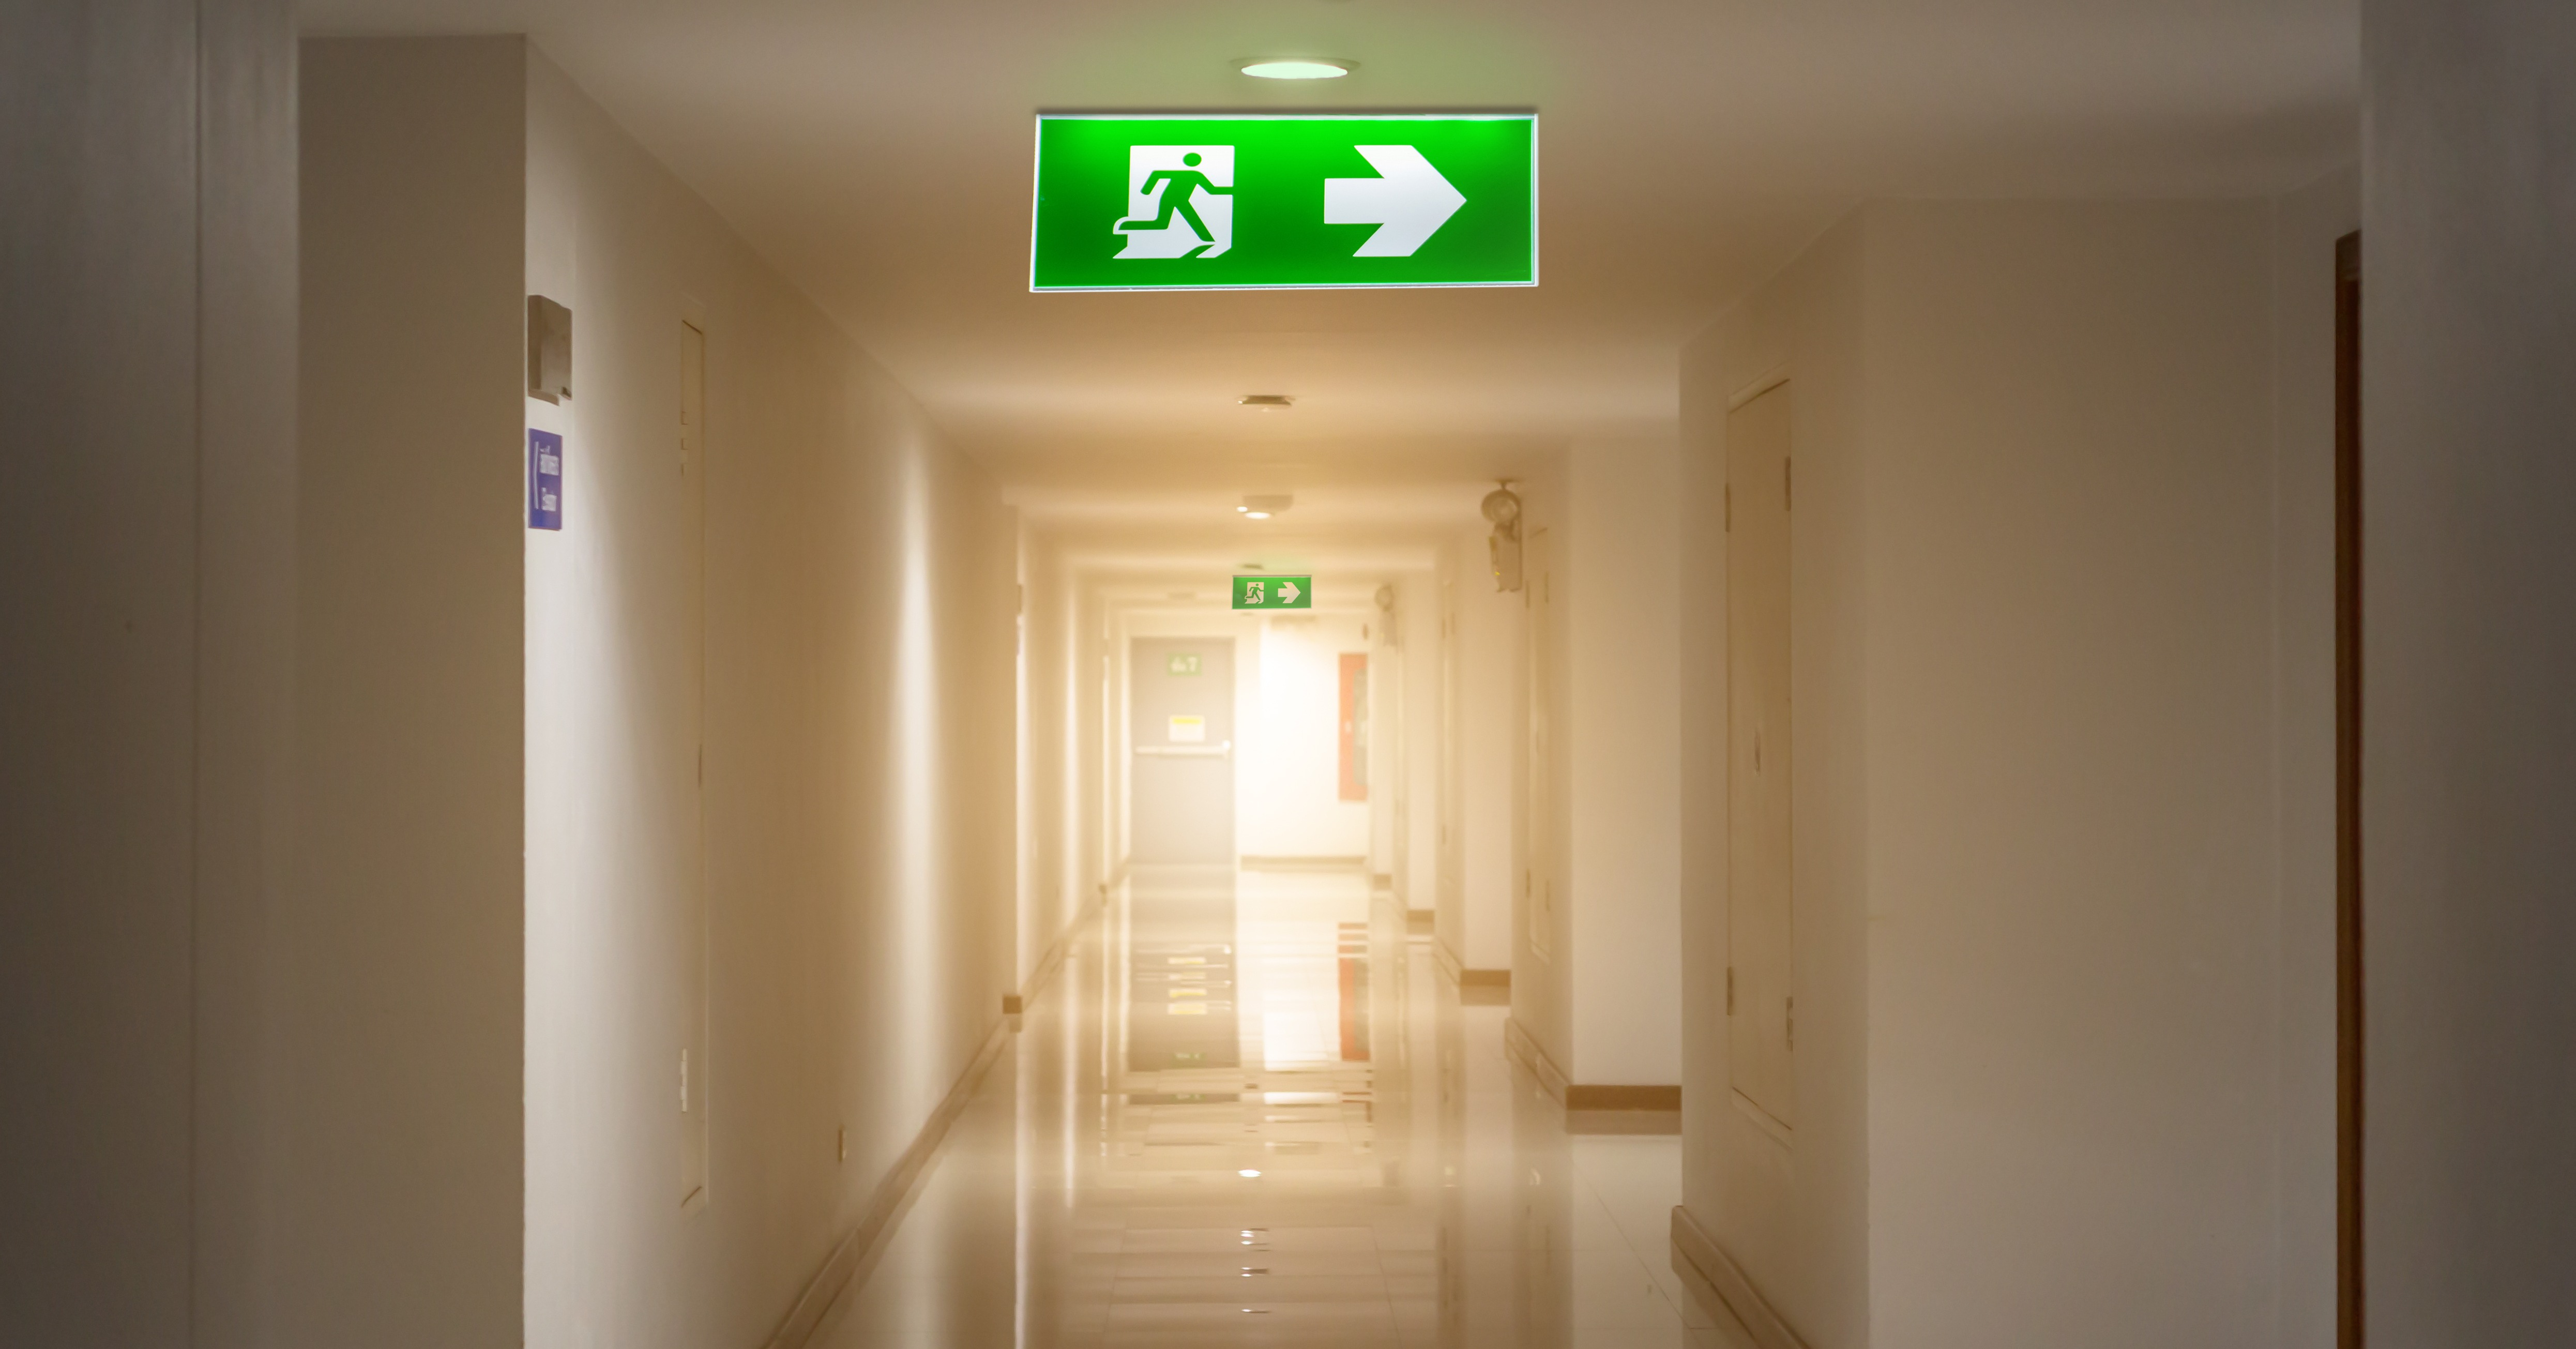 The Importance of Effective Wayfinding Signage for Fire Safety in Buildings